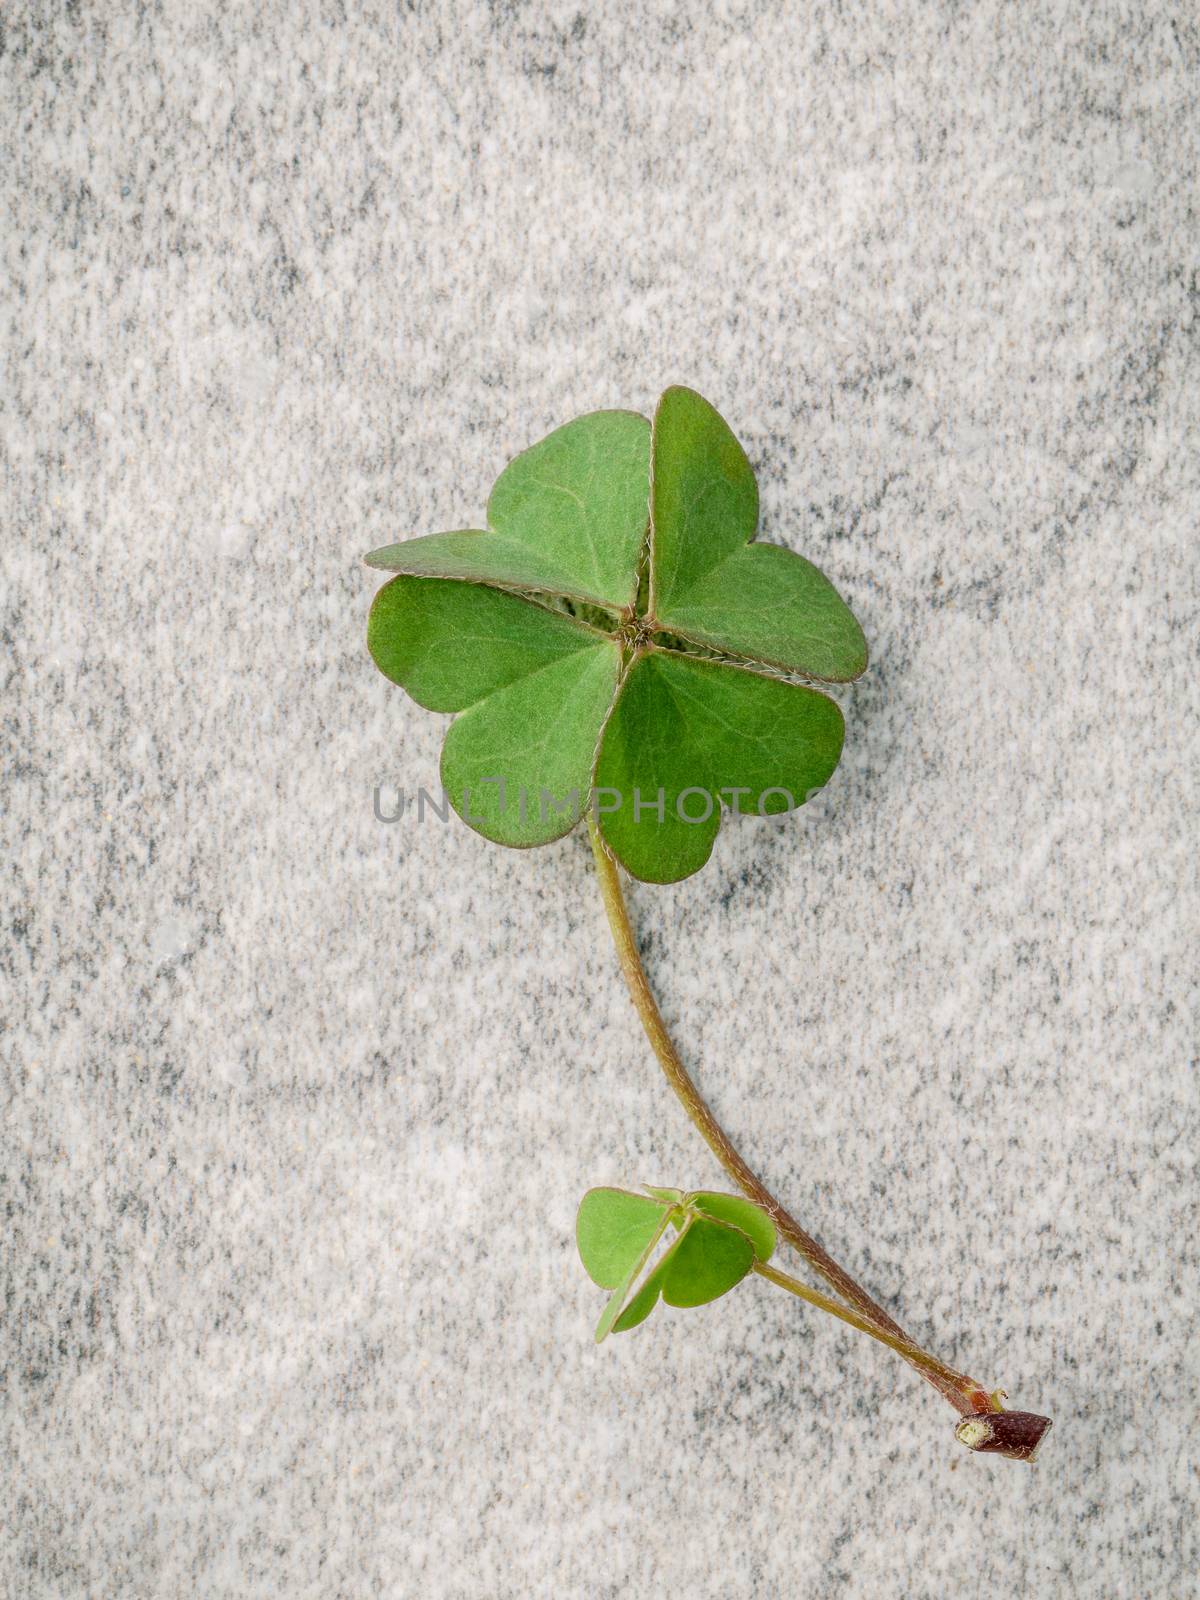 Closeup clovers leaves  on Stone background. The symbolic of the Four Leaf Clover the first is for faith, the second is for hope, the third is for love, and the fourth is for luck. Clover and shamrocks is symbolic dreams .